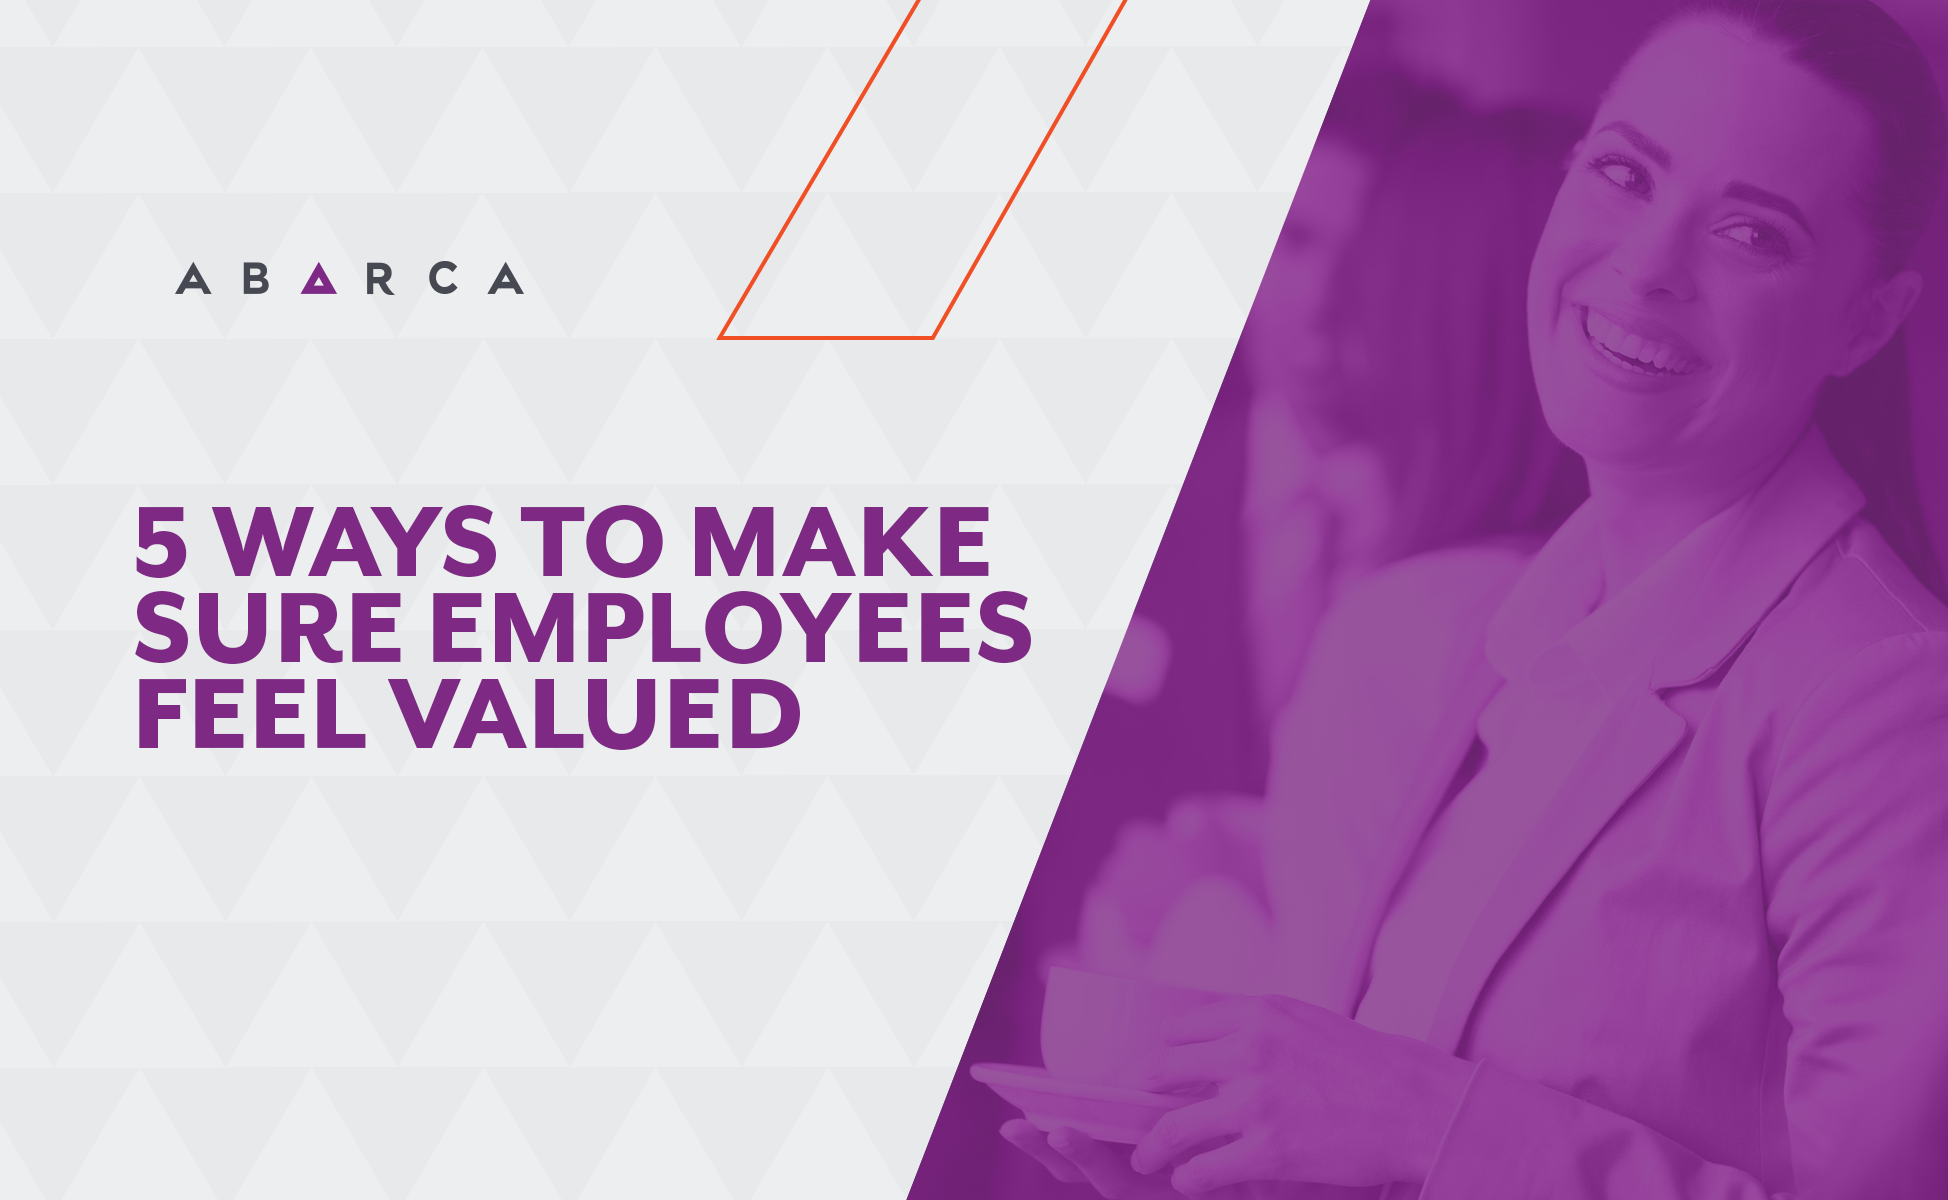 Abarca Health: 5 ways to make sure employees feel valued